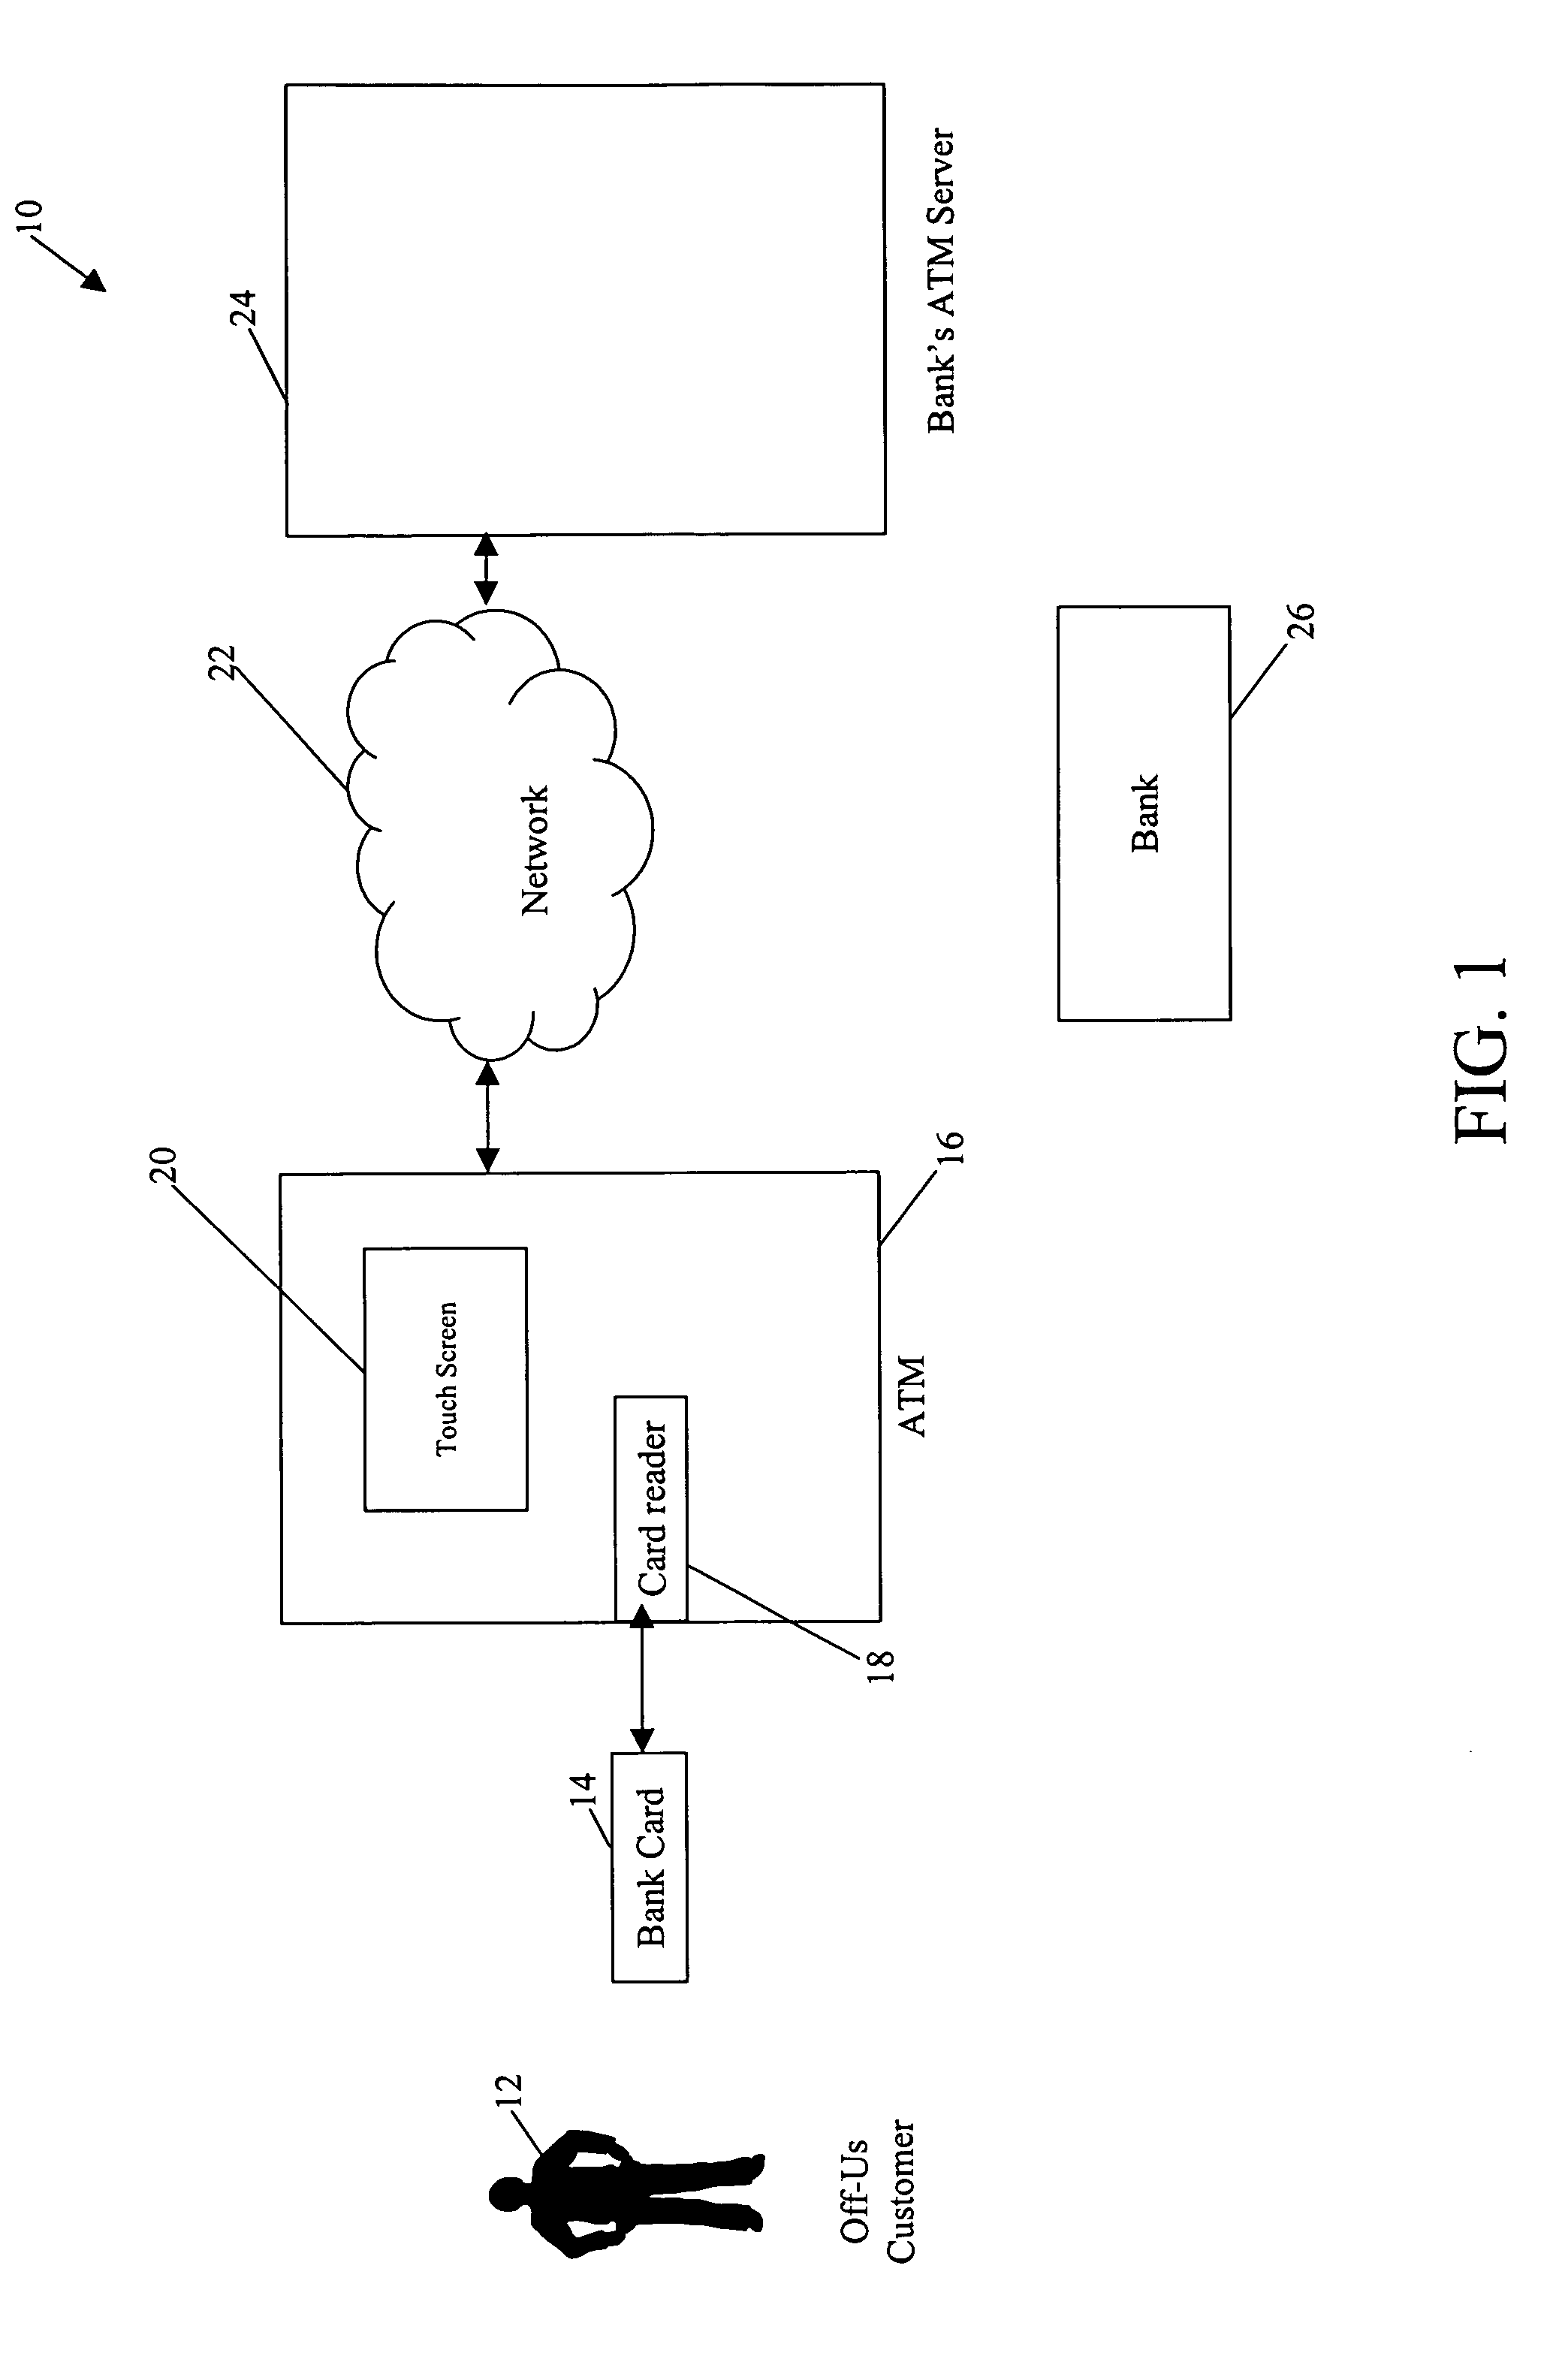 Method and system for providing an incentive to use an automated teller machine (ATM)